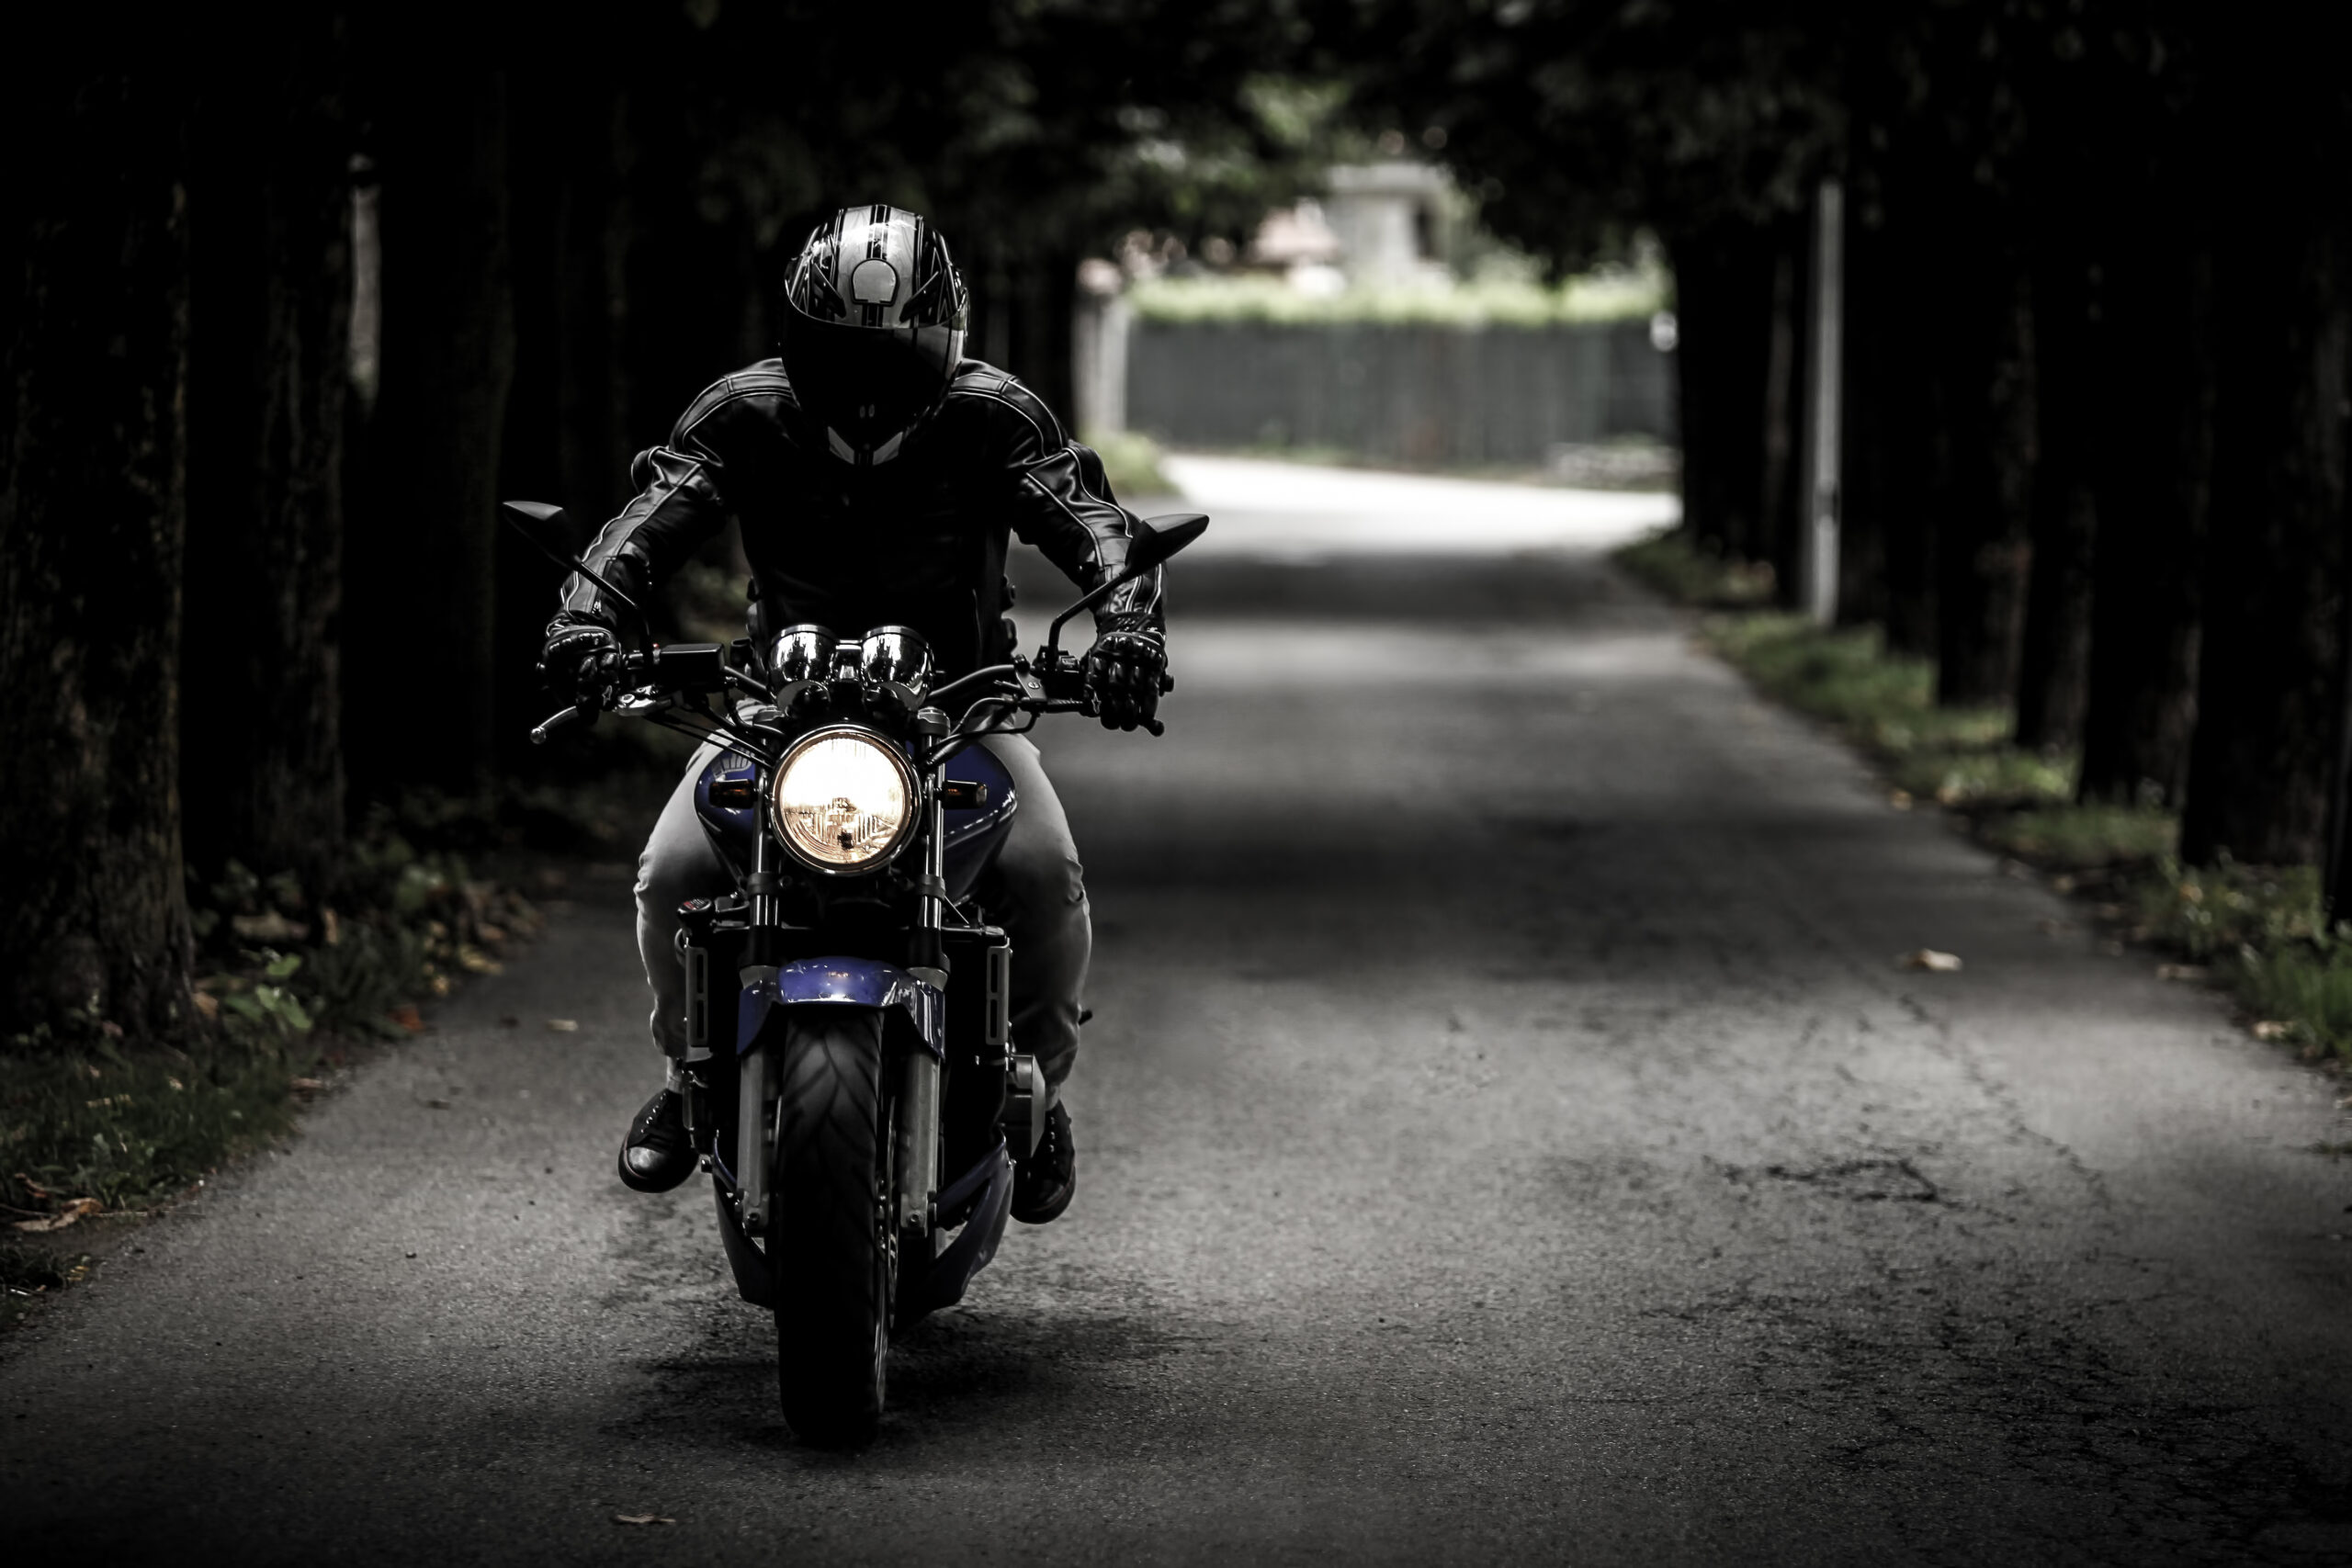 The biggest, baddest motorcycles money can buy